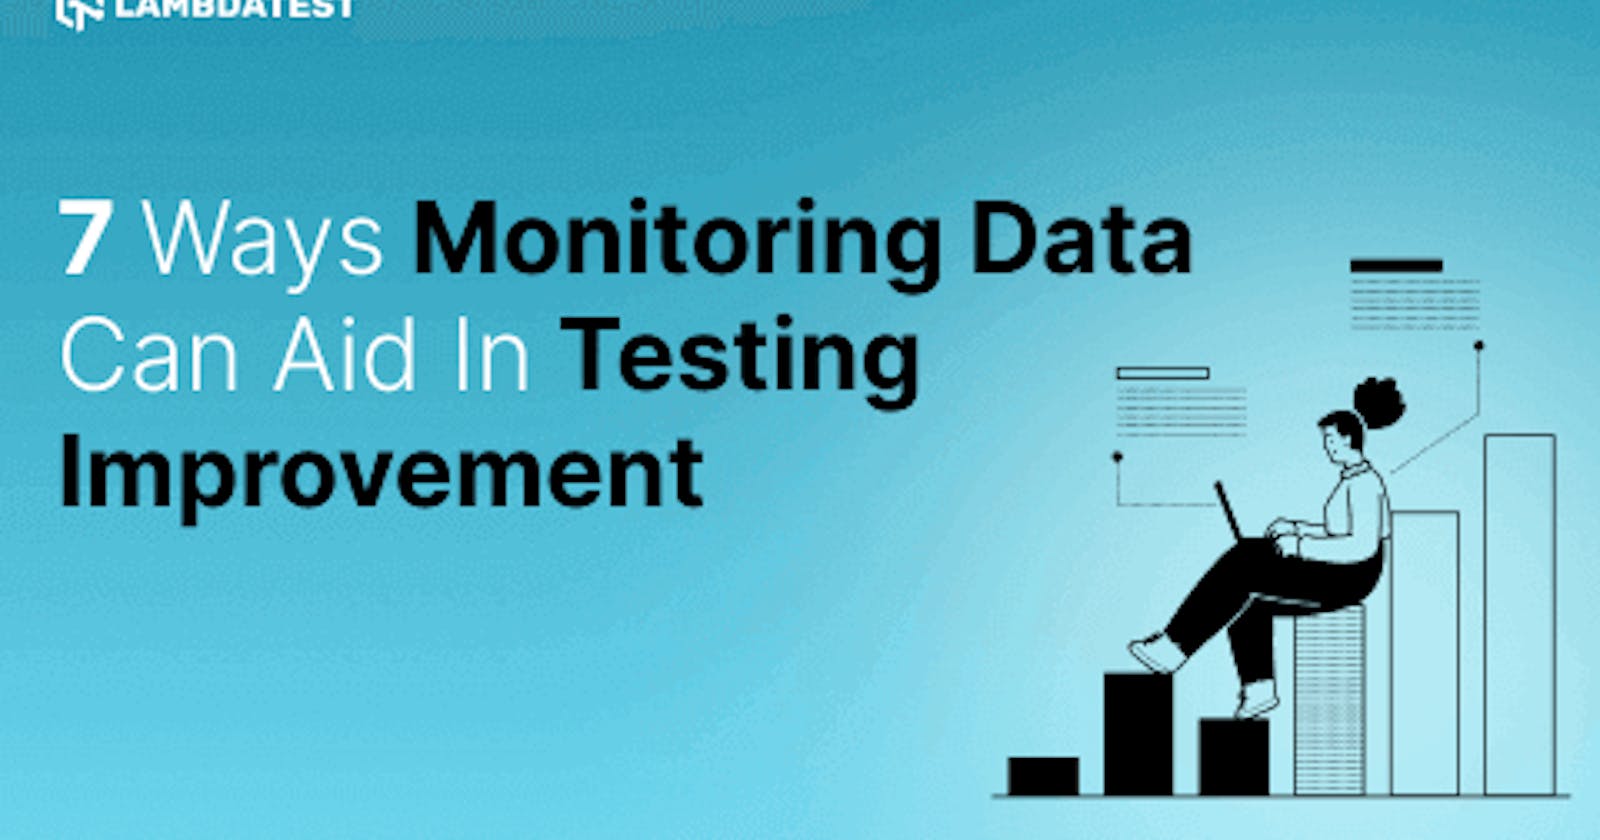 7 Ways Monitoring Data Can Aid in Testing Improvement